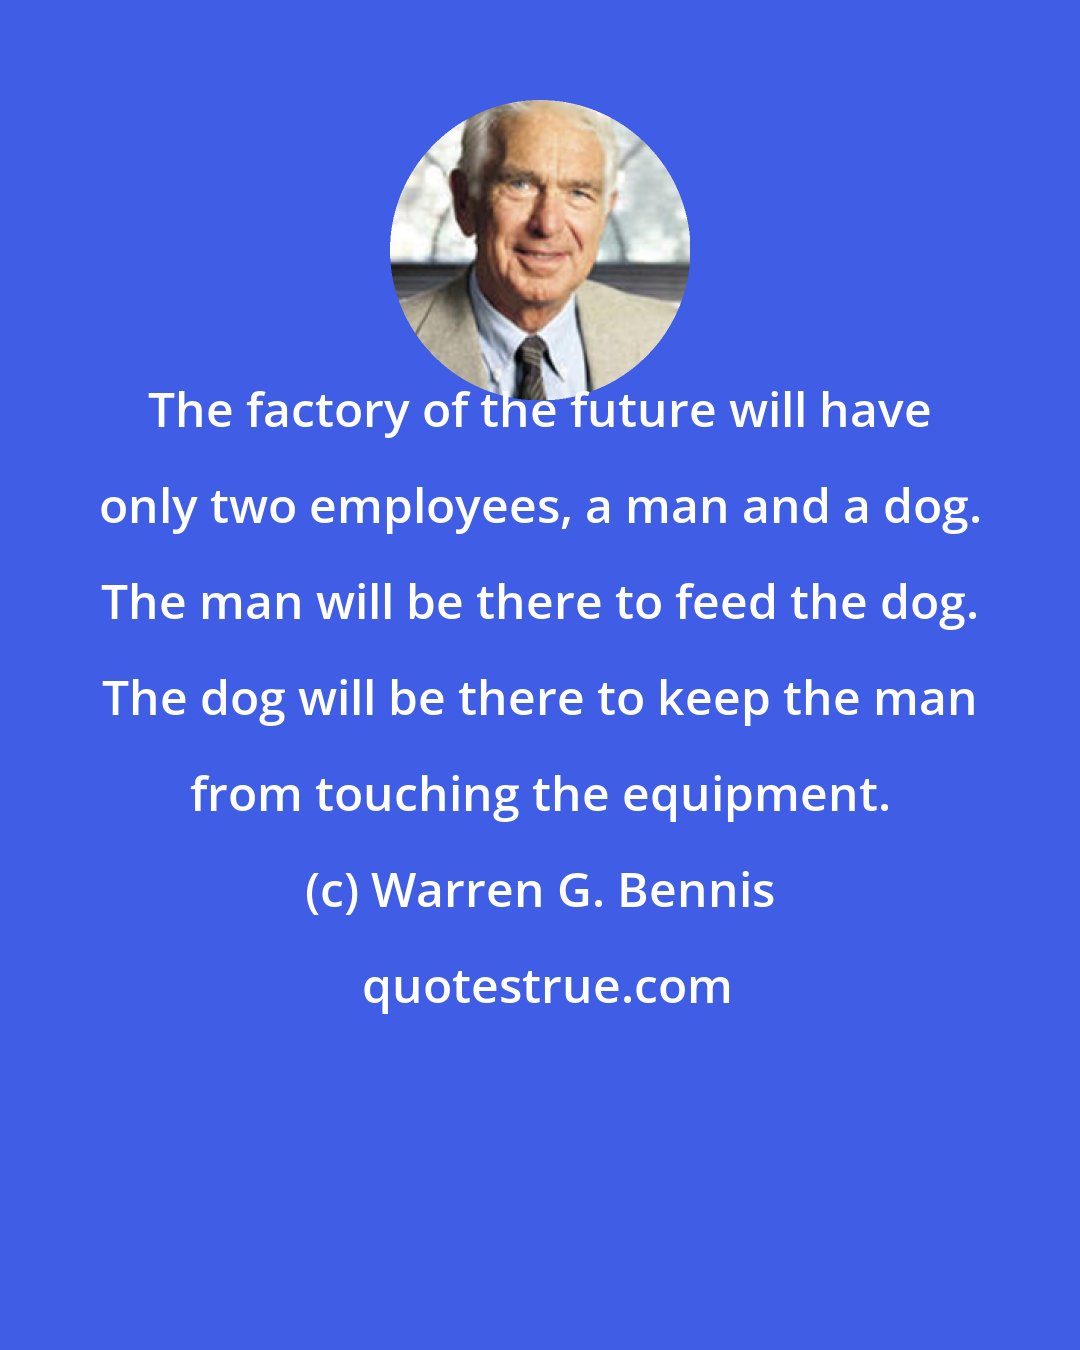 Warren G. Bennis: The factory of the future will have only two employees, a man and a dog. The man will be there to feed the dog. The dog will be there to keep the man from touching the equipment.